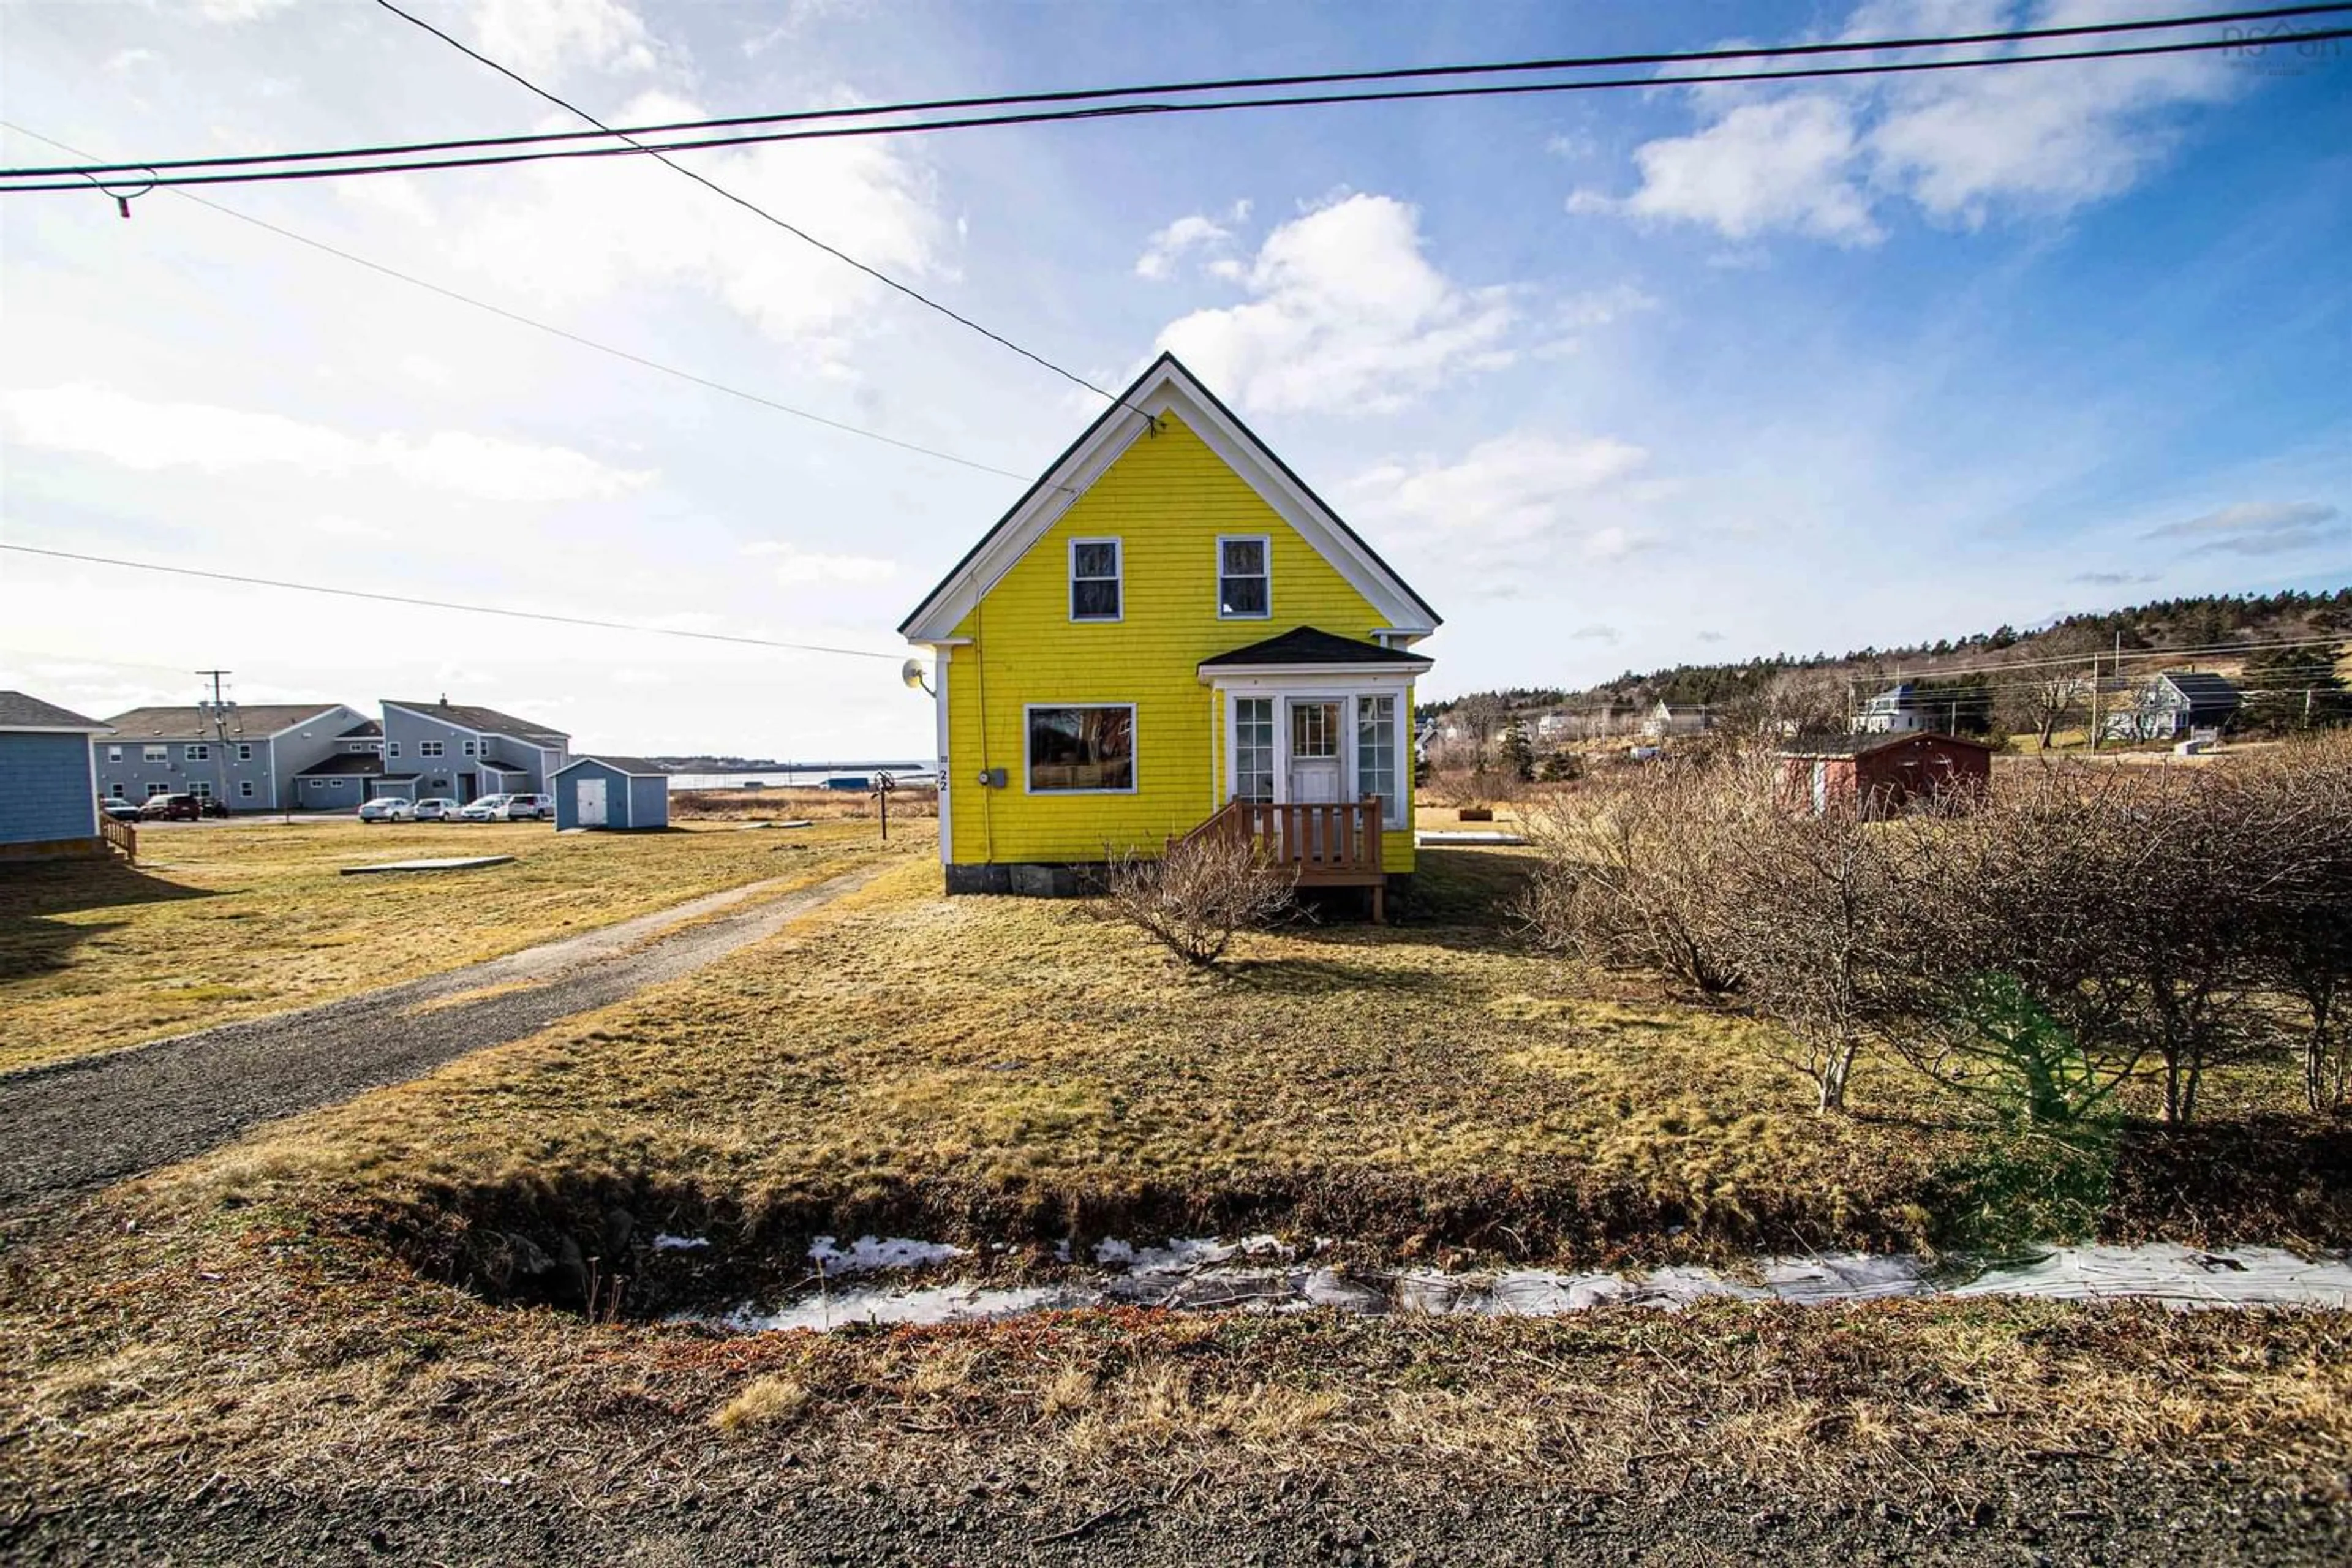 Home with unknown exterior material for 22 Overcove Road, Freeport Nova Scotia B0V 1B0